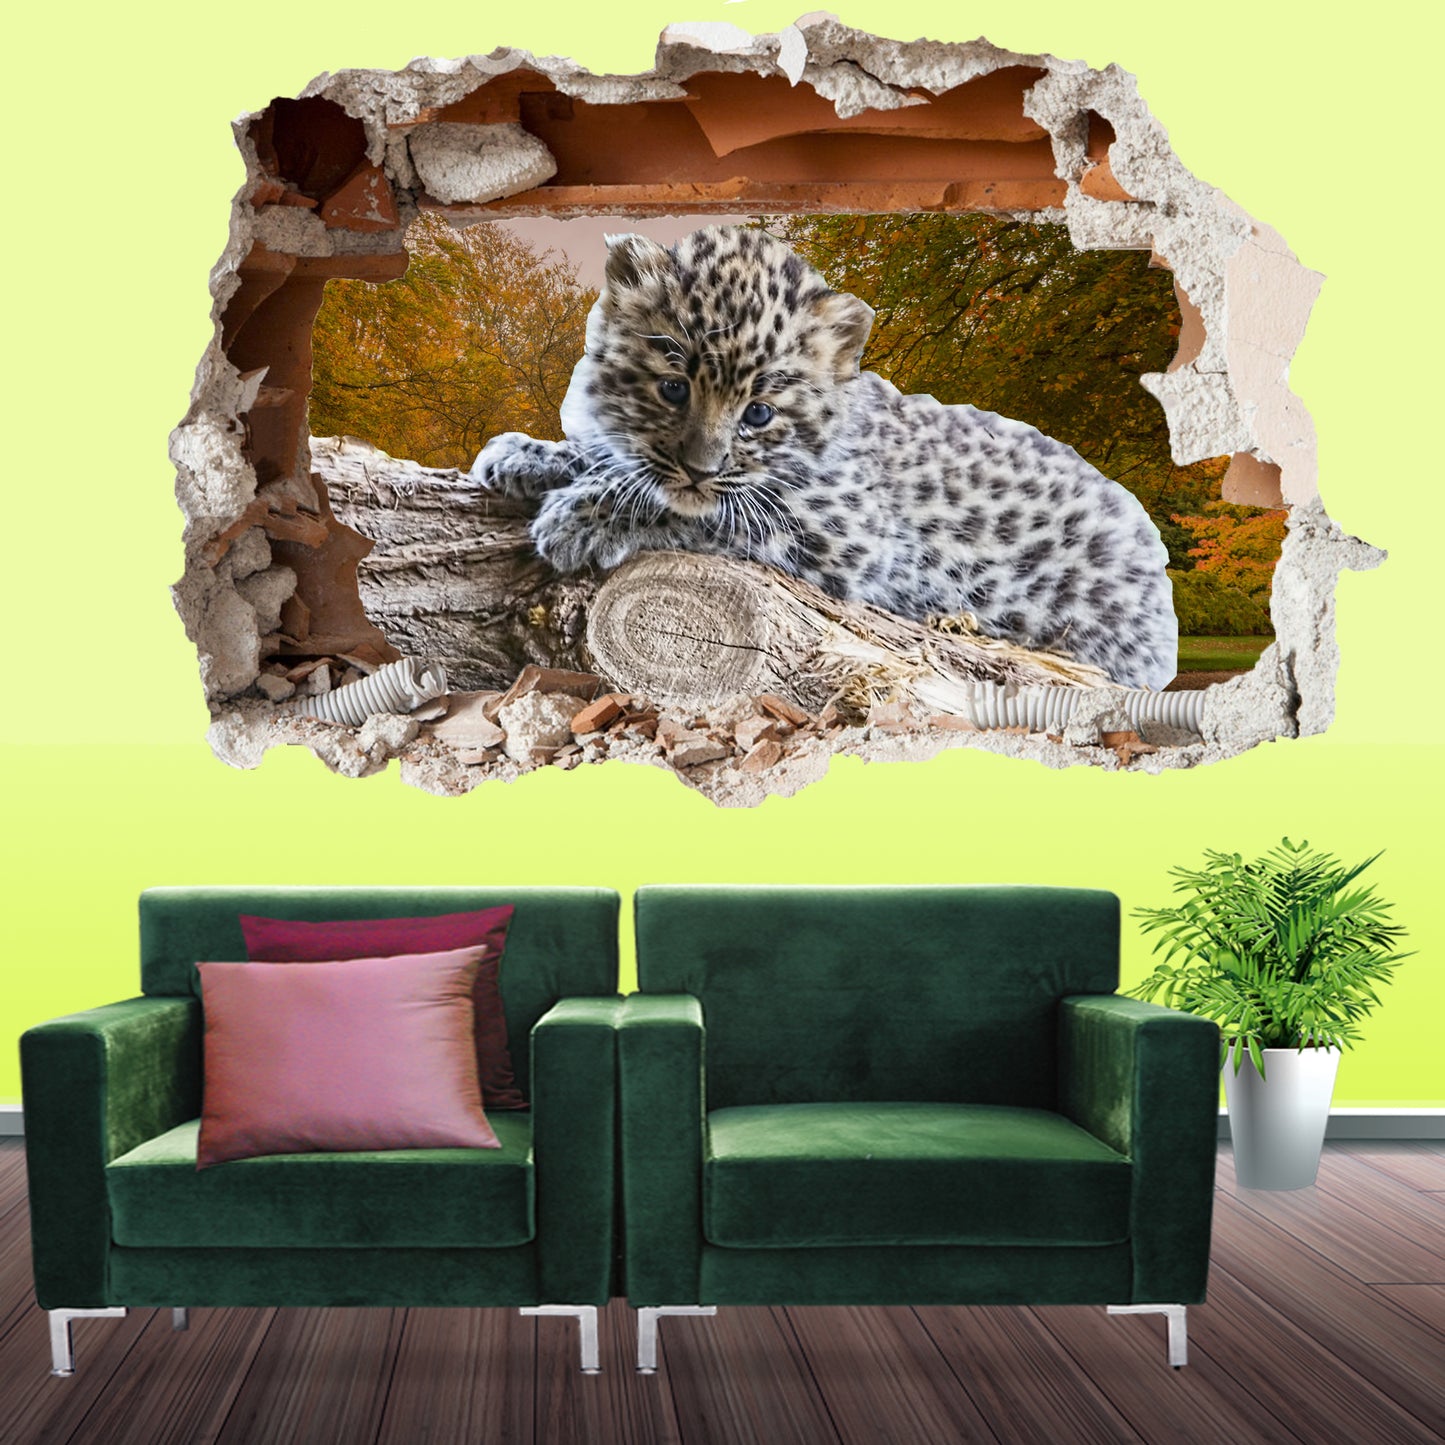 Nature's Beauty Leopard Wall Vinyl for Wildlife Enthusiasts Poster Stickers Room Office Nursery Shop Decor Decal Mural RV0